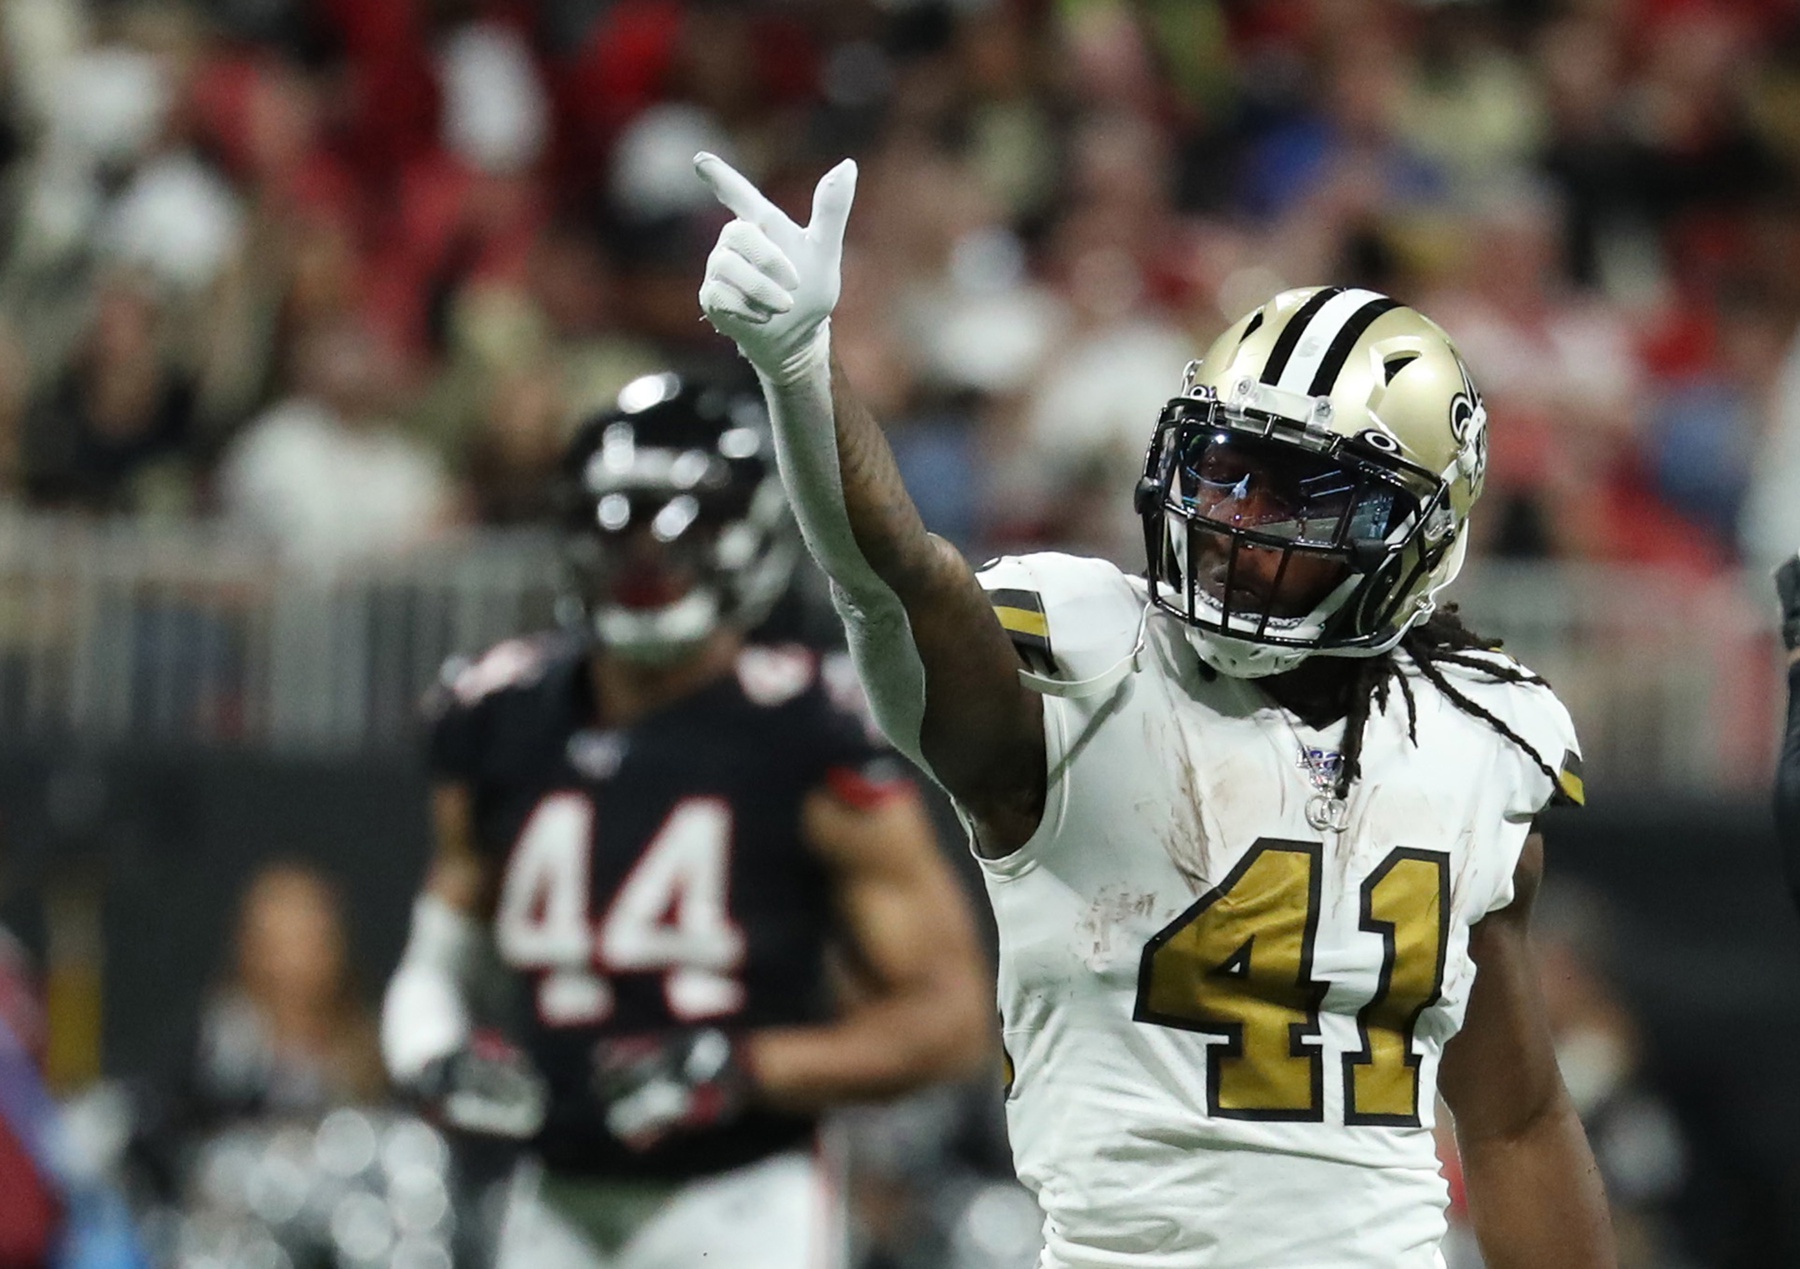 Alvin Kamara requests, then supplies swagger for New Orleans